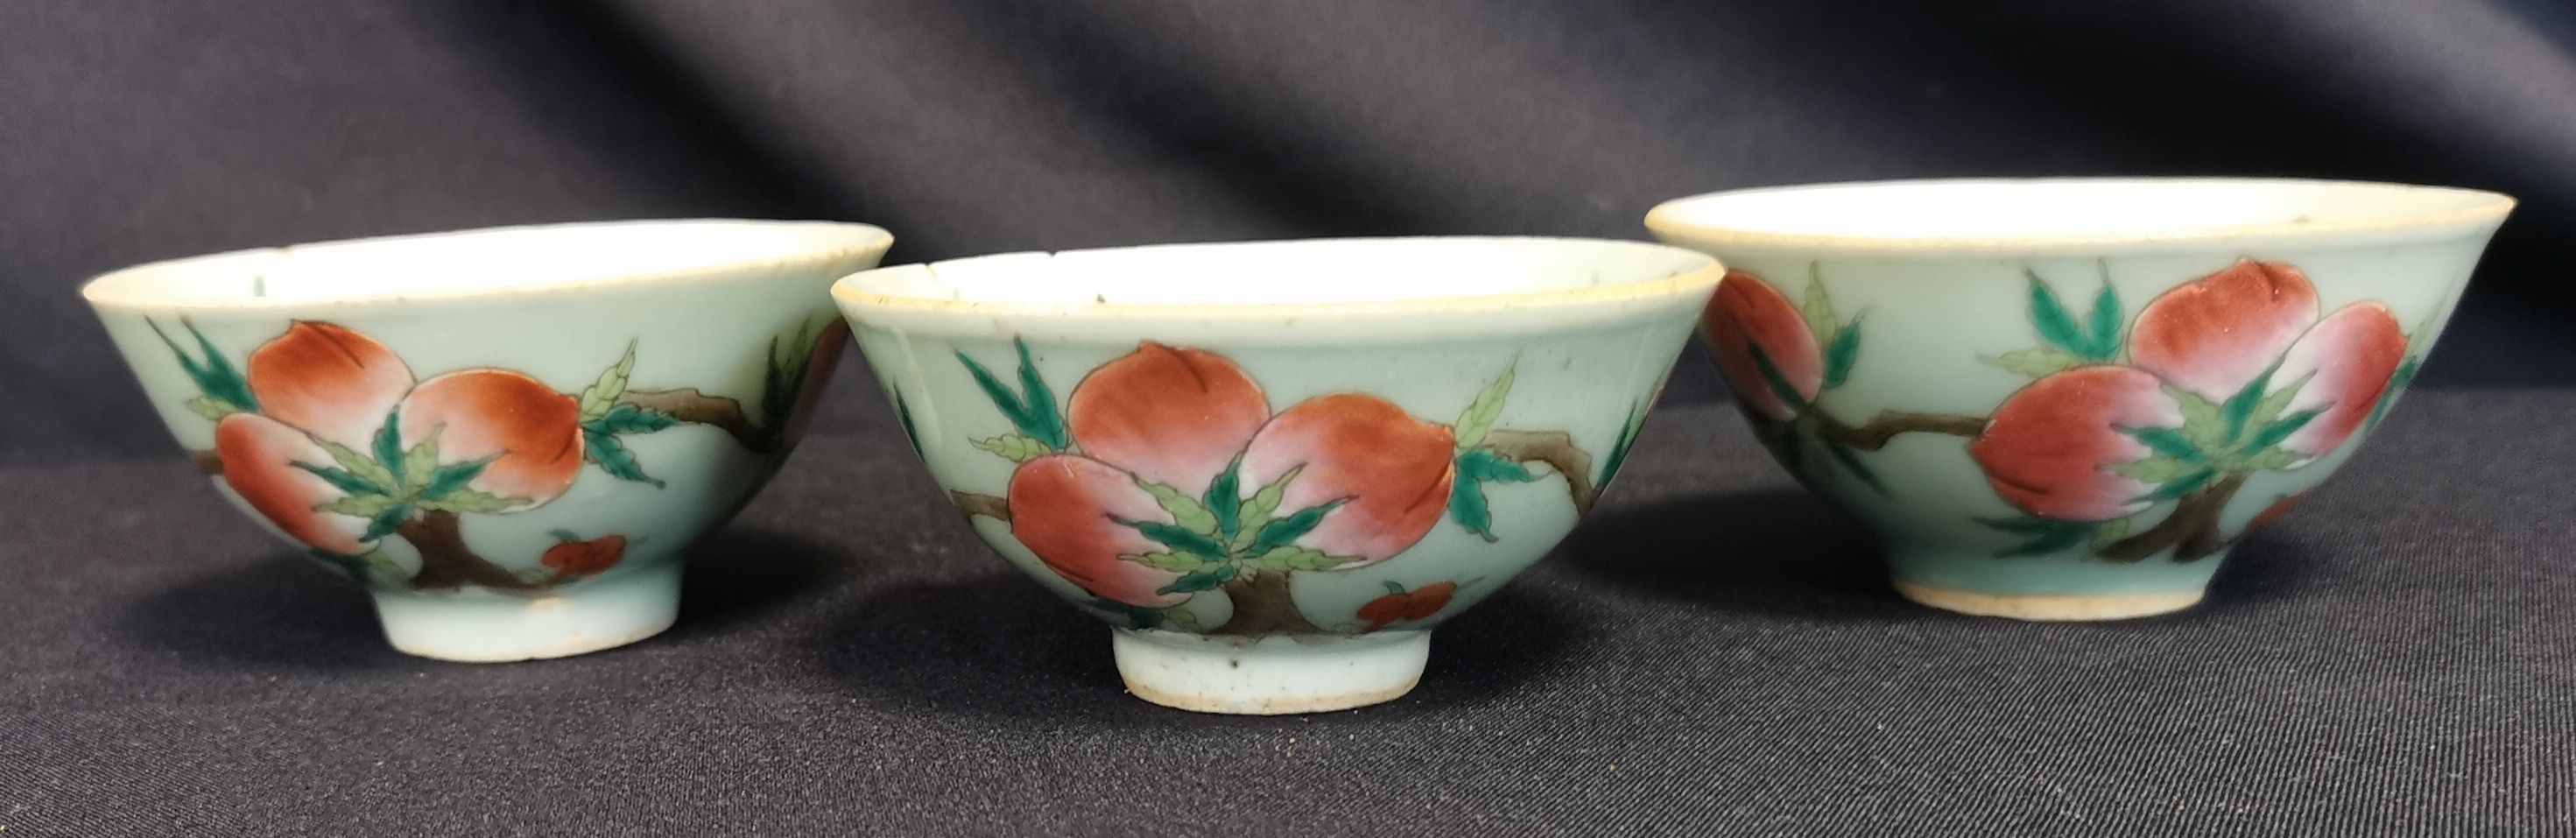 3 TEA BOWLS WITH PEACHES - Image 3 of 5